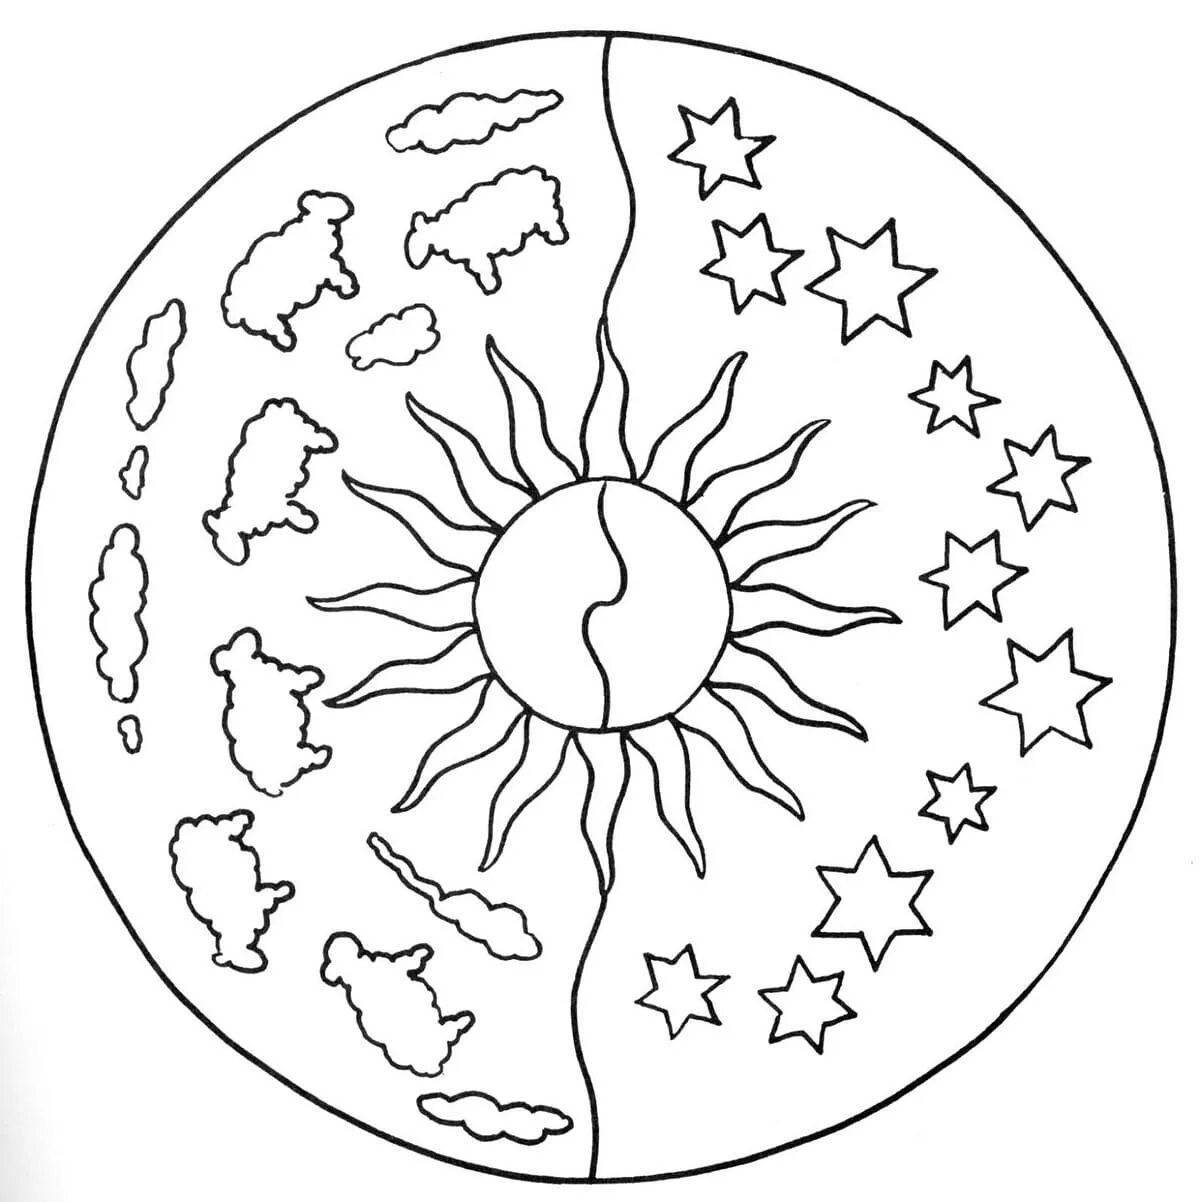 Colorful mandala coloring pages for 5-6 year olds